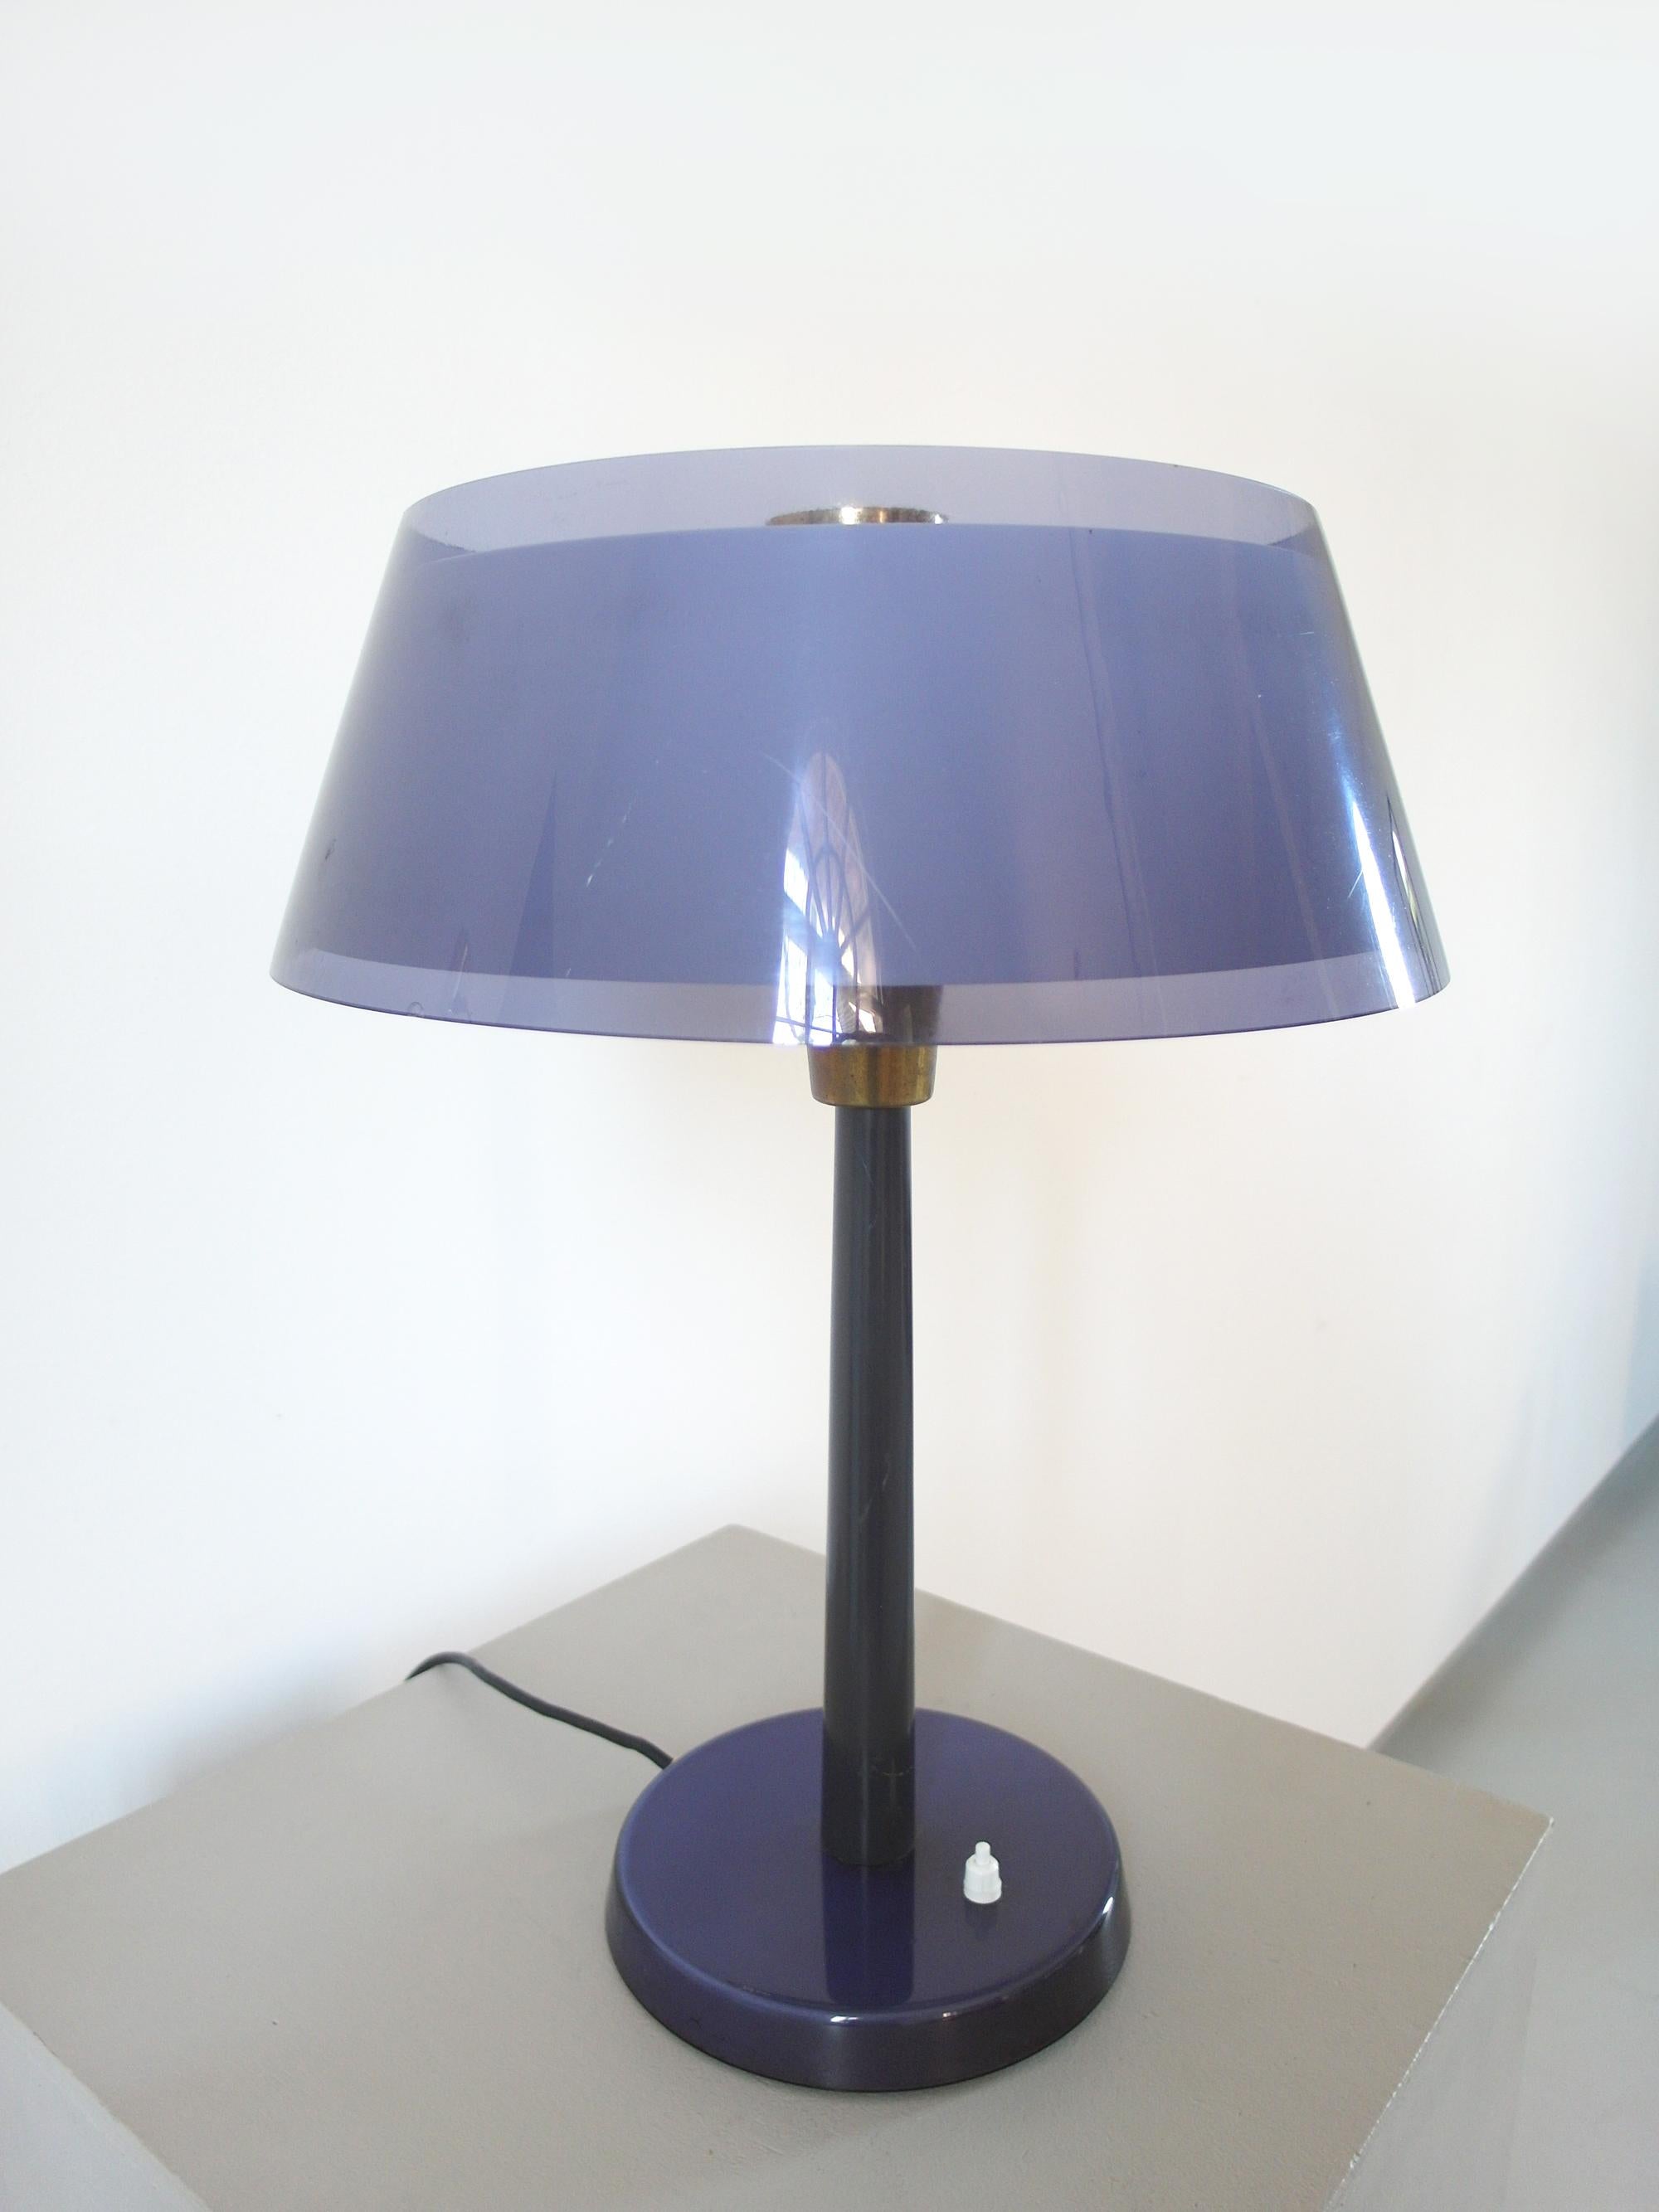 Purple Tuomas Table Light in by Yki Nummi for Stockmann-Orno, Finland, 1950s For Sale 6